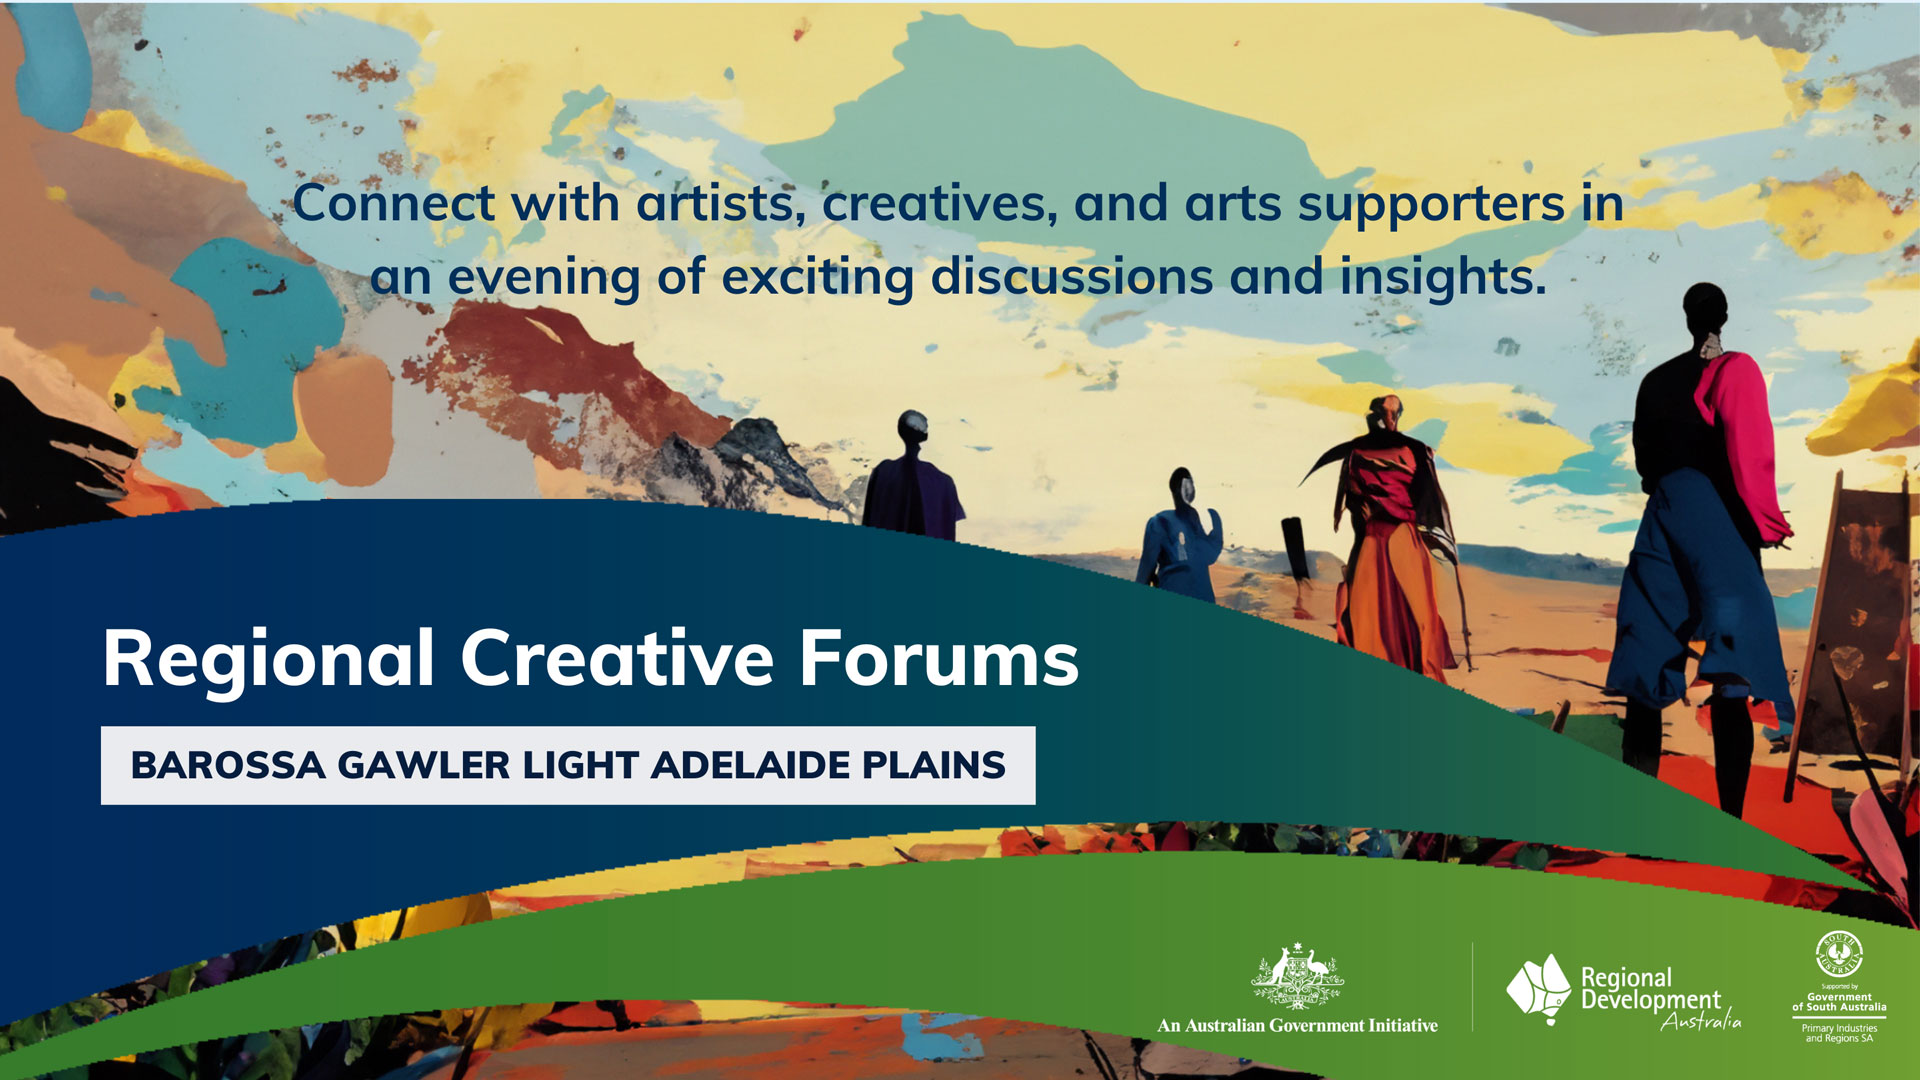 Connect with artists, creatives, and arts supporters in an evening of exciting discussions and insights. Regional Creative Forums Barossa Gawler Light Adelaide Plains. Artists on a landscape in painting style.